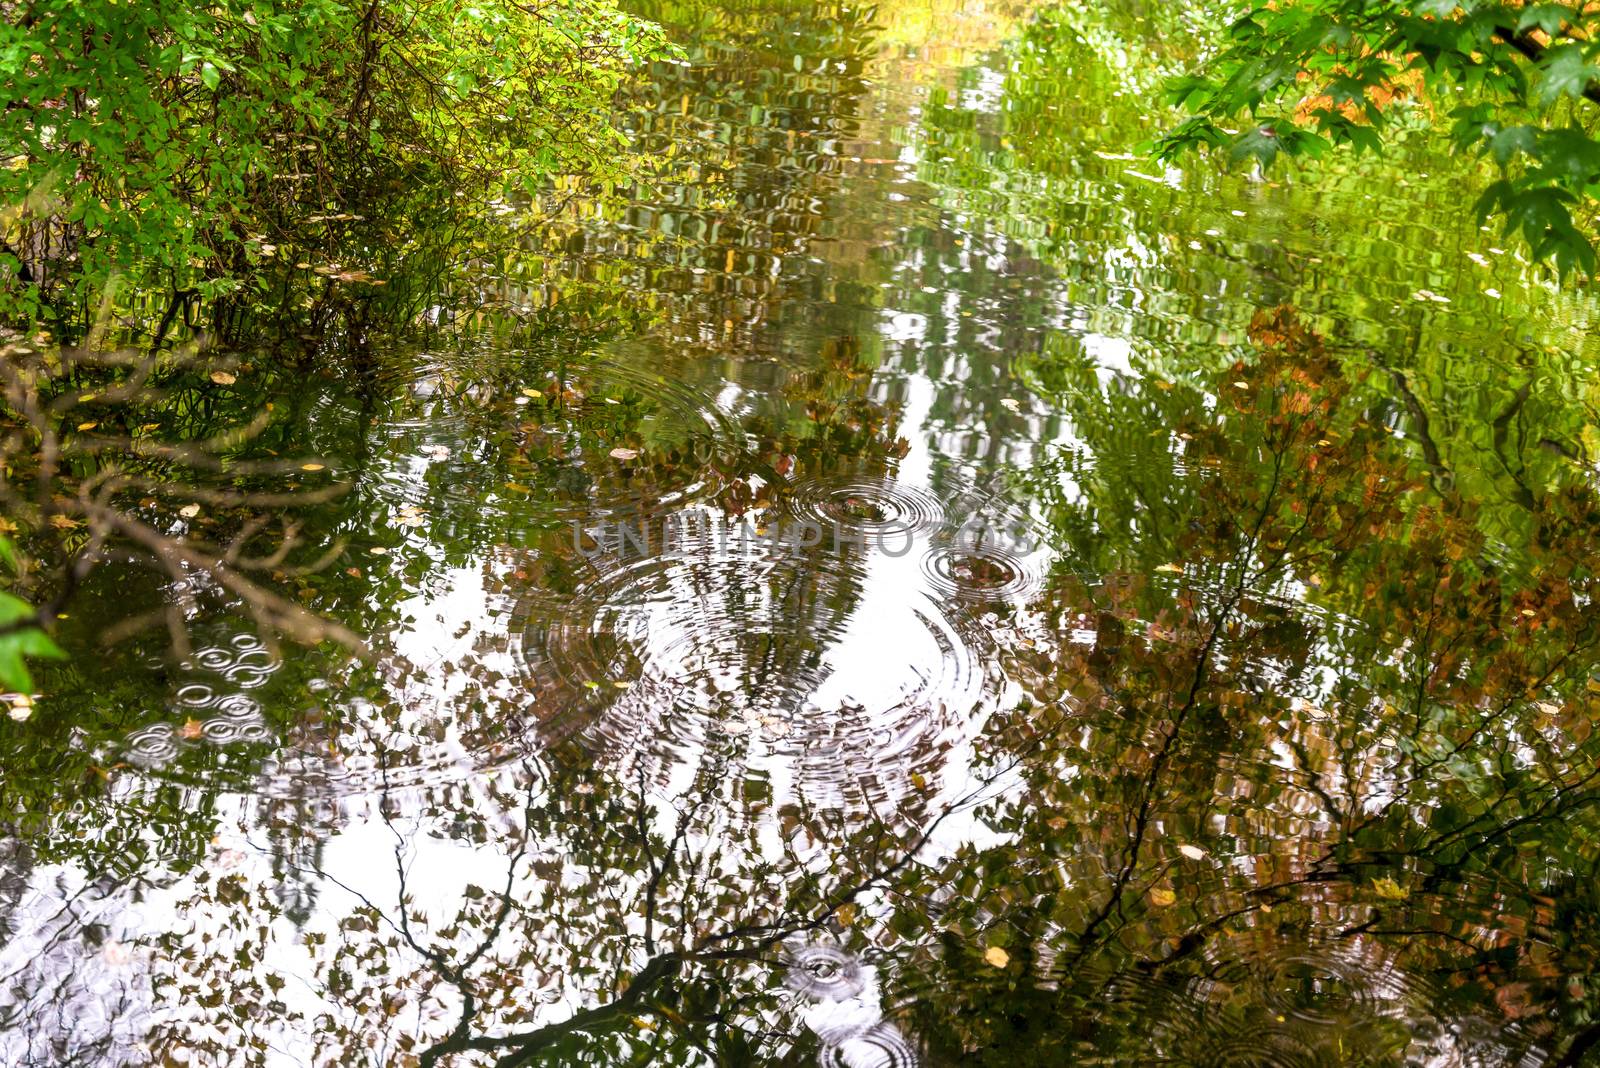 Colours of autumn in water reflection at Benmore Botanic Garden, Loch Lomond and the Trossachs National Park, Scotland